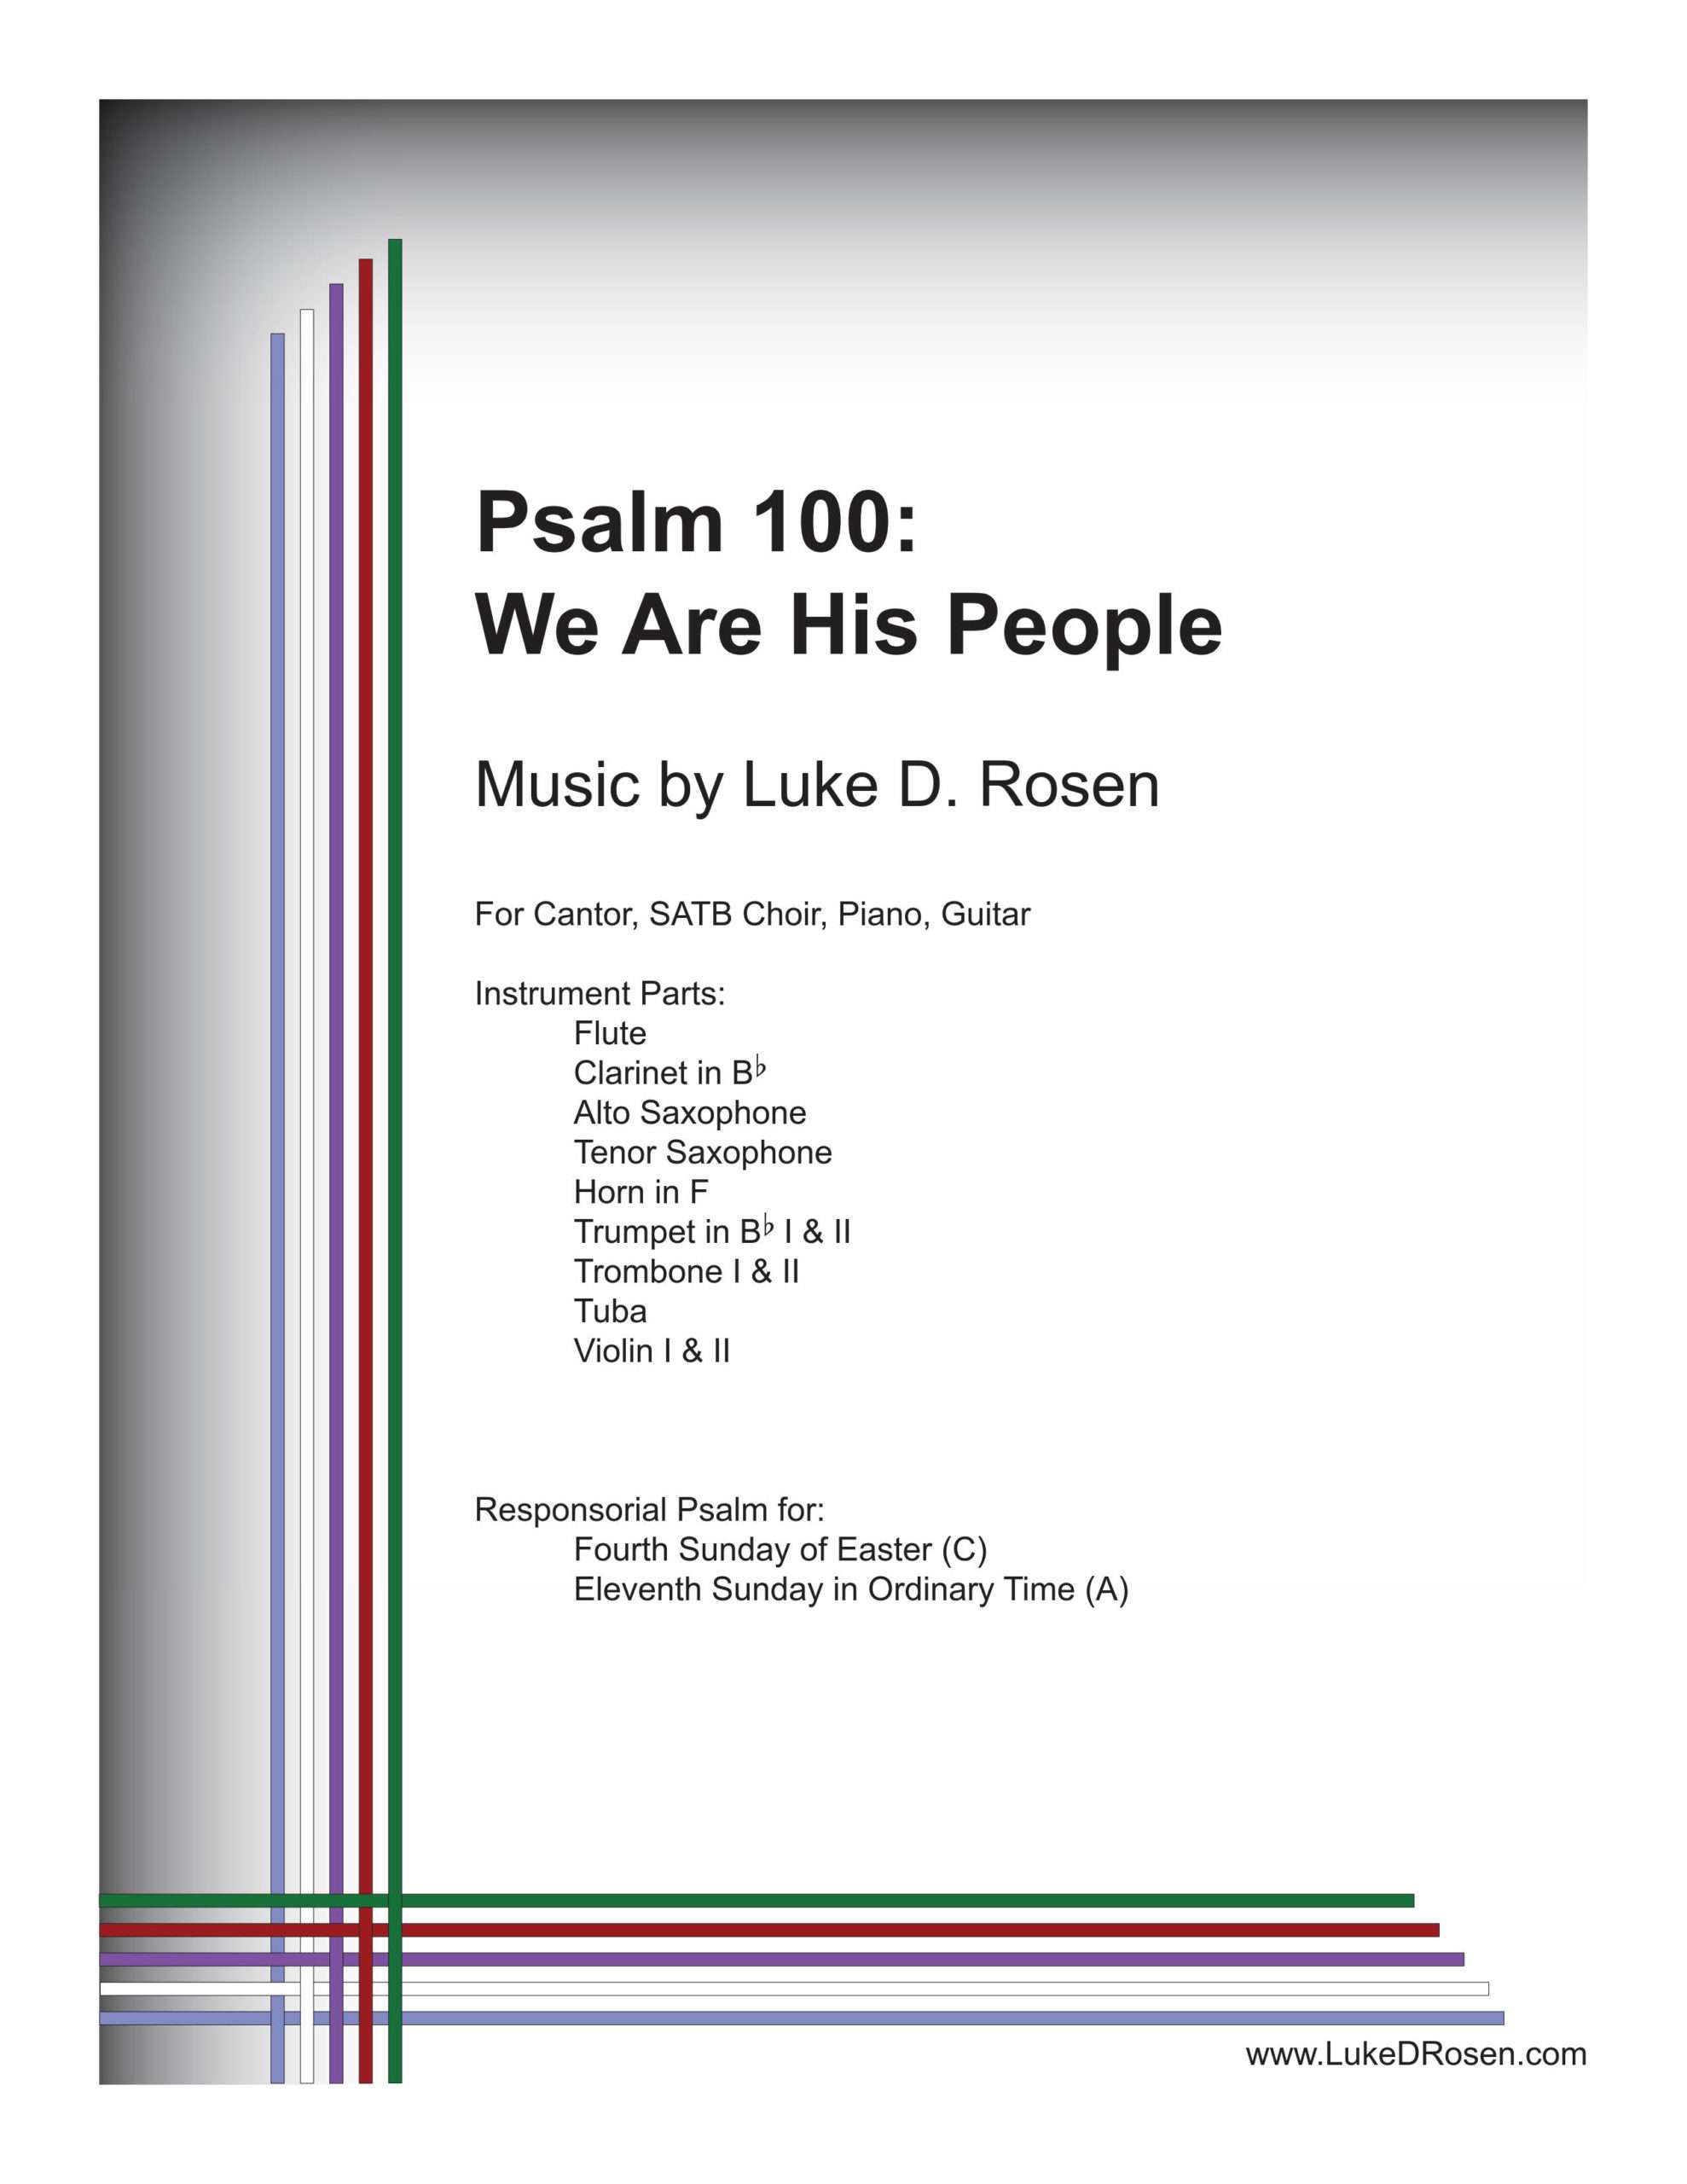 Psalm 100 – We Are His People (Rosen)